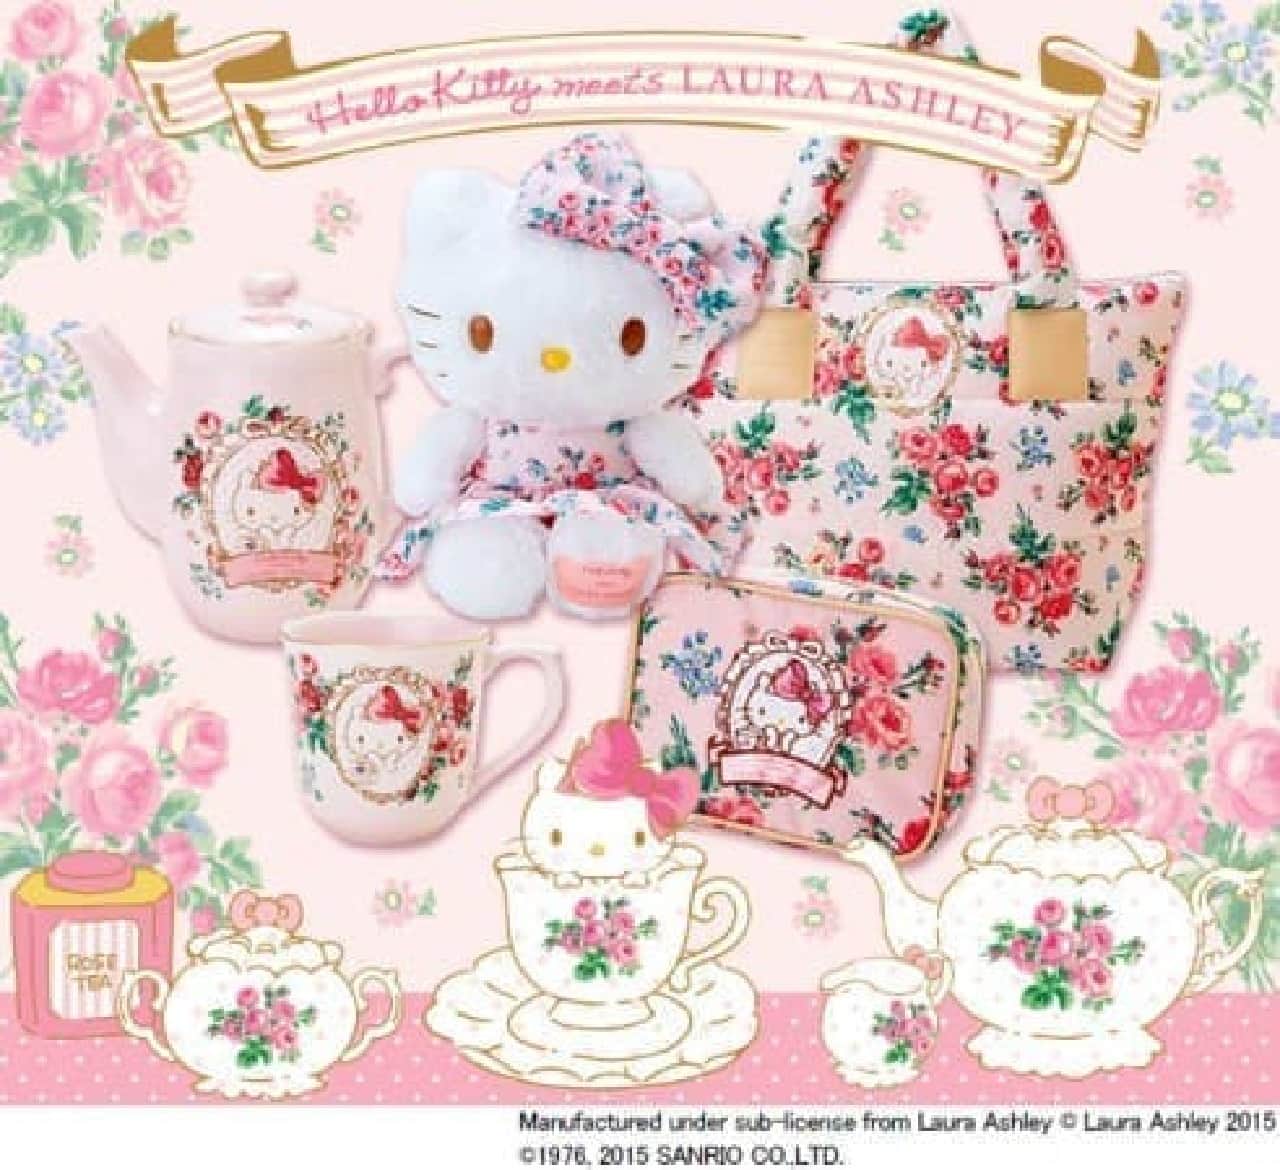 An adult cute collaboration between the elegant rose motif and Hello Kitty! (Source: Sanrio official website)